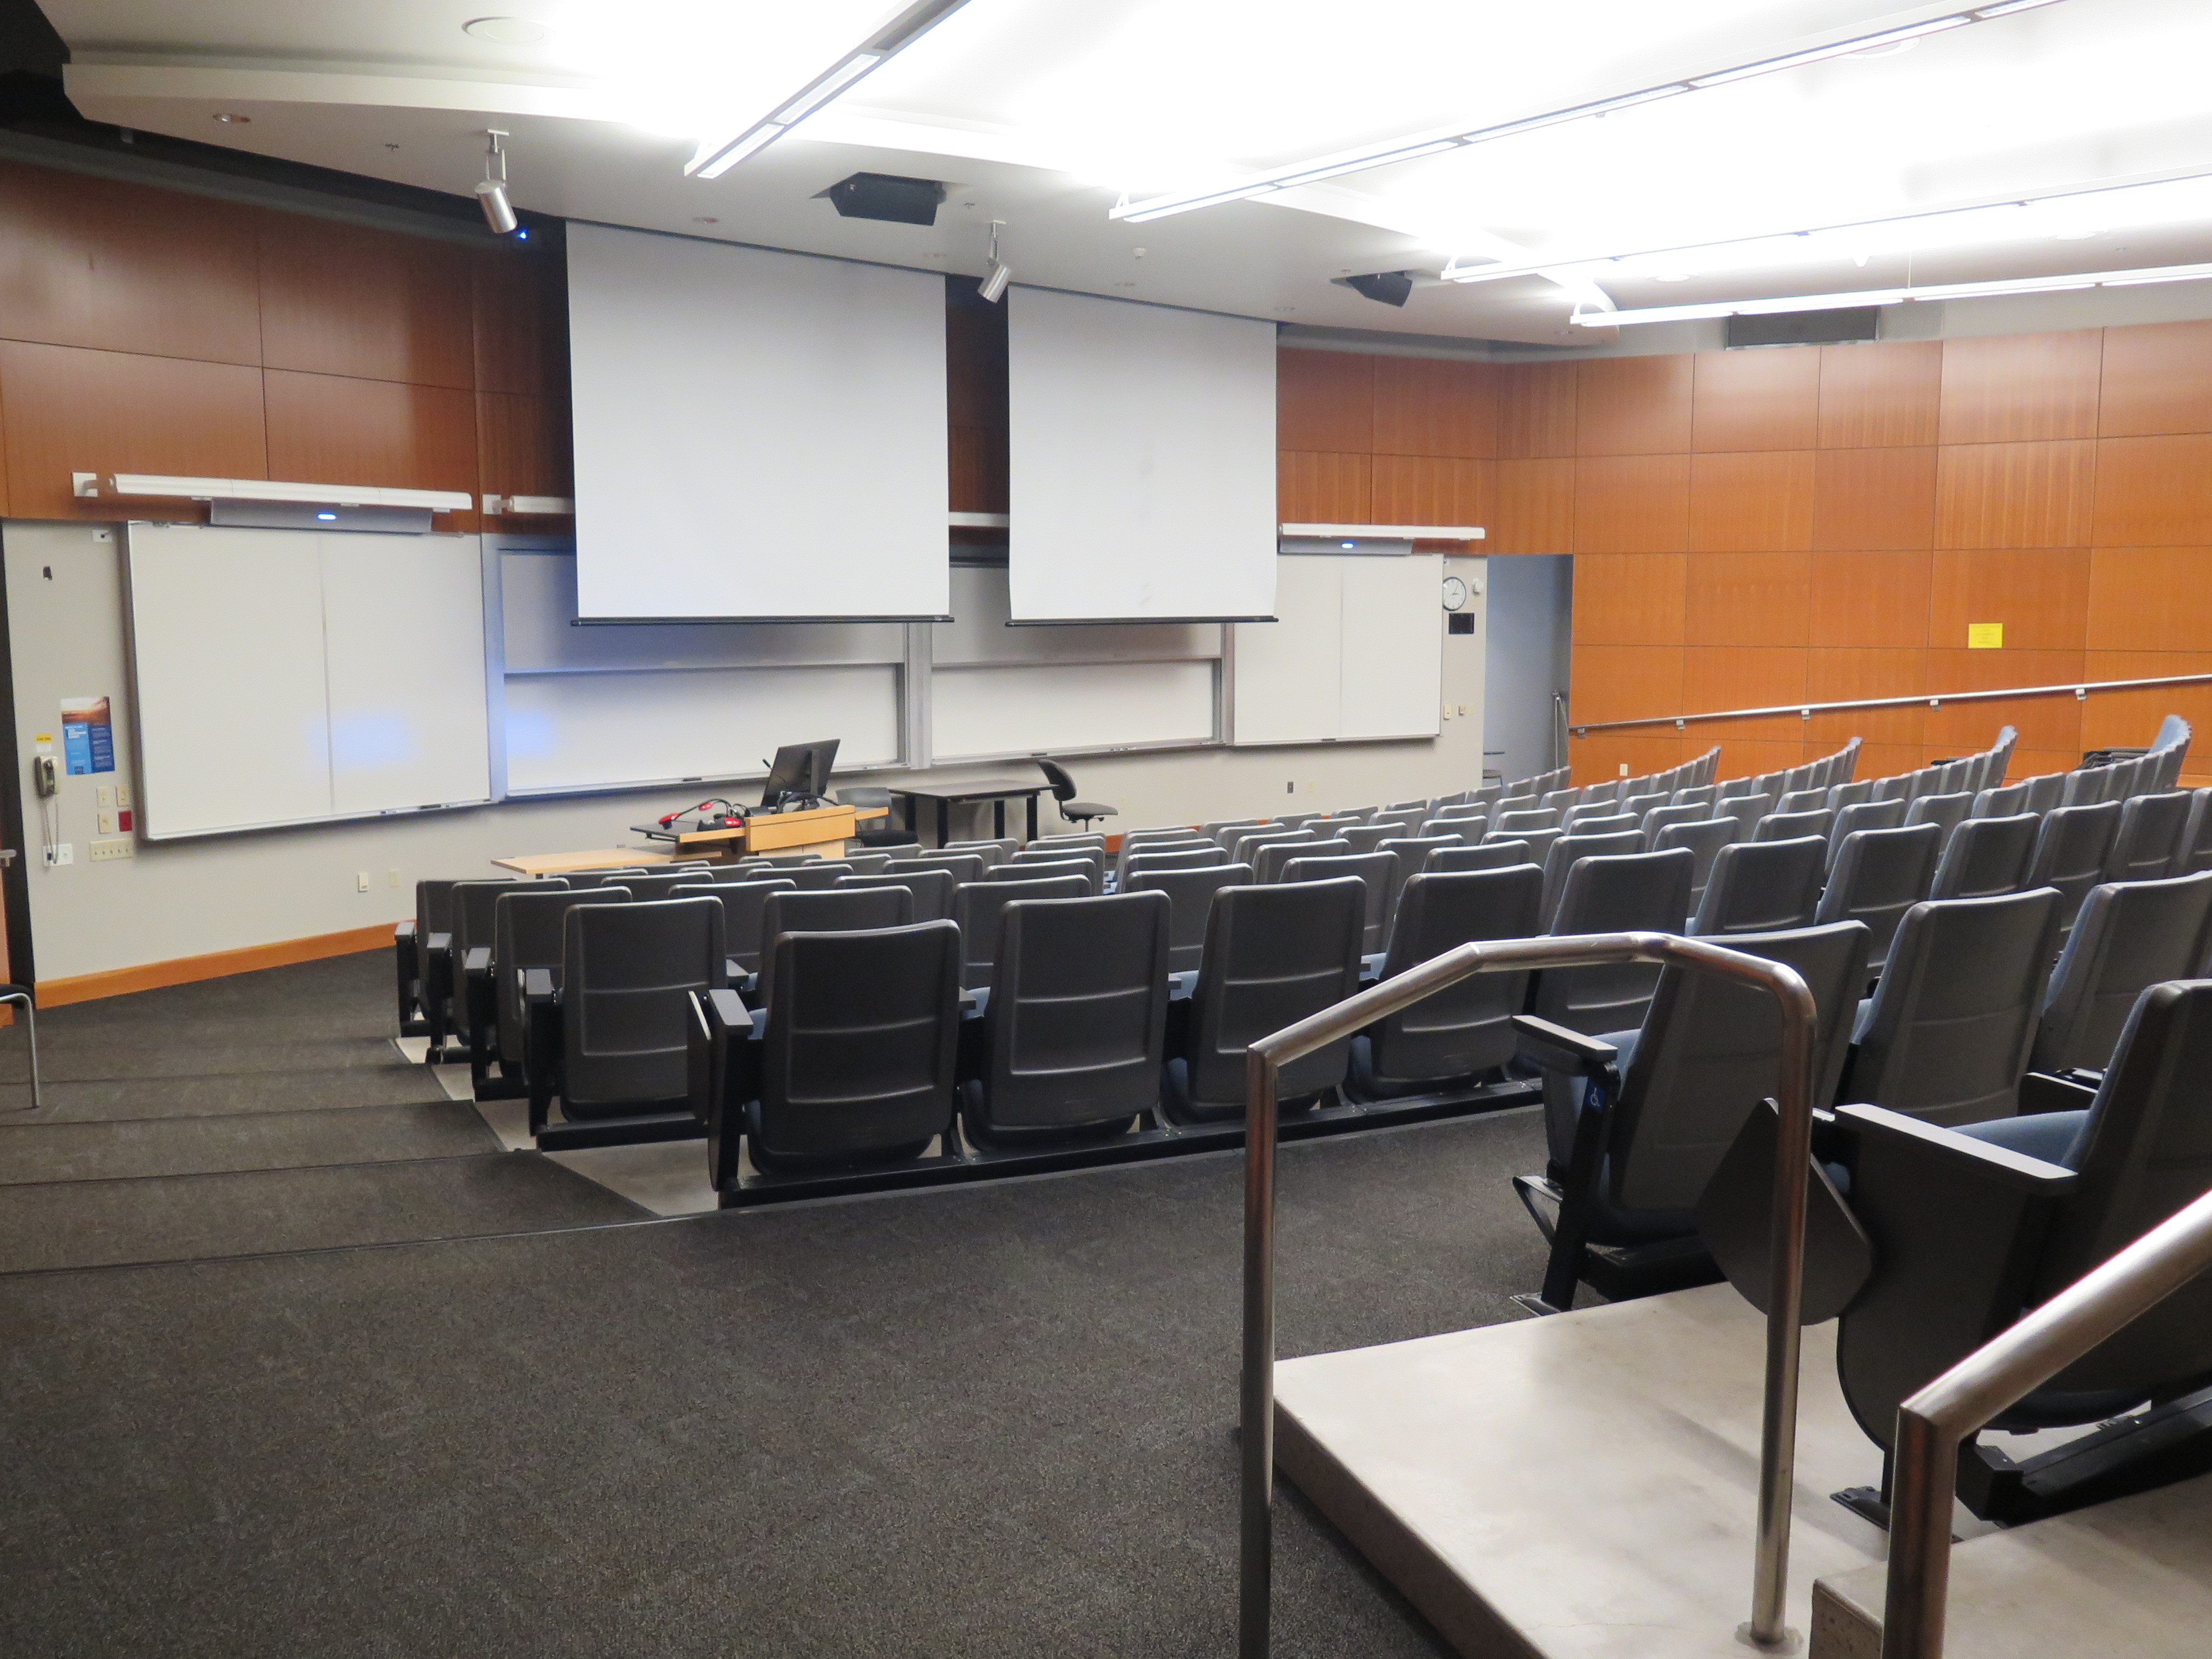 Lecture Hall consists of auditorium style, stationary tablet armchairs, White board and podium are located at the front of the room.